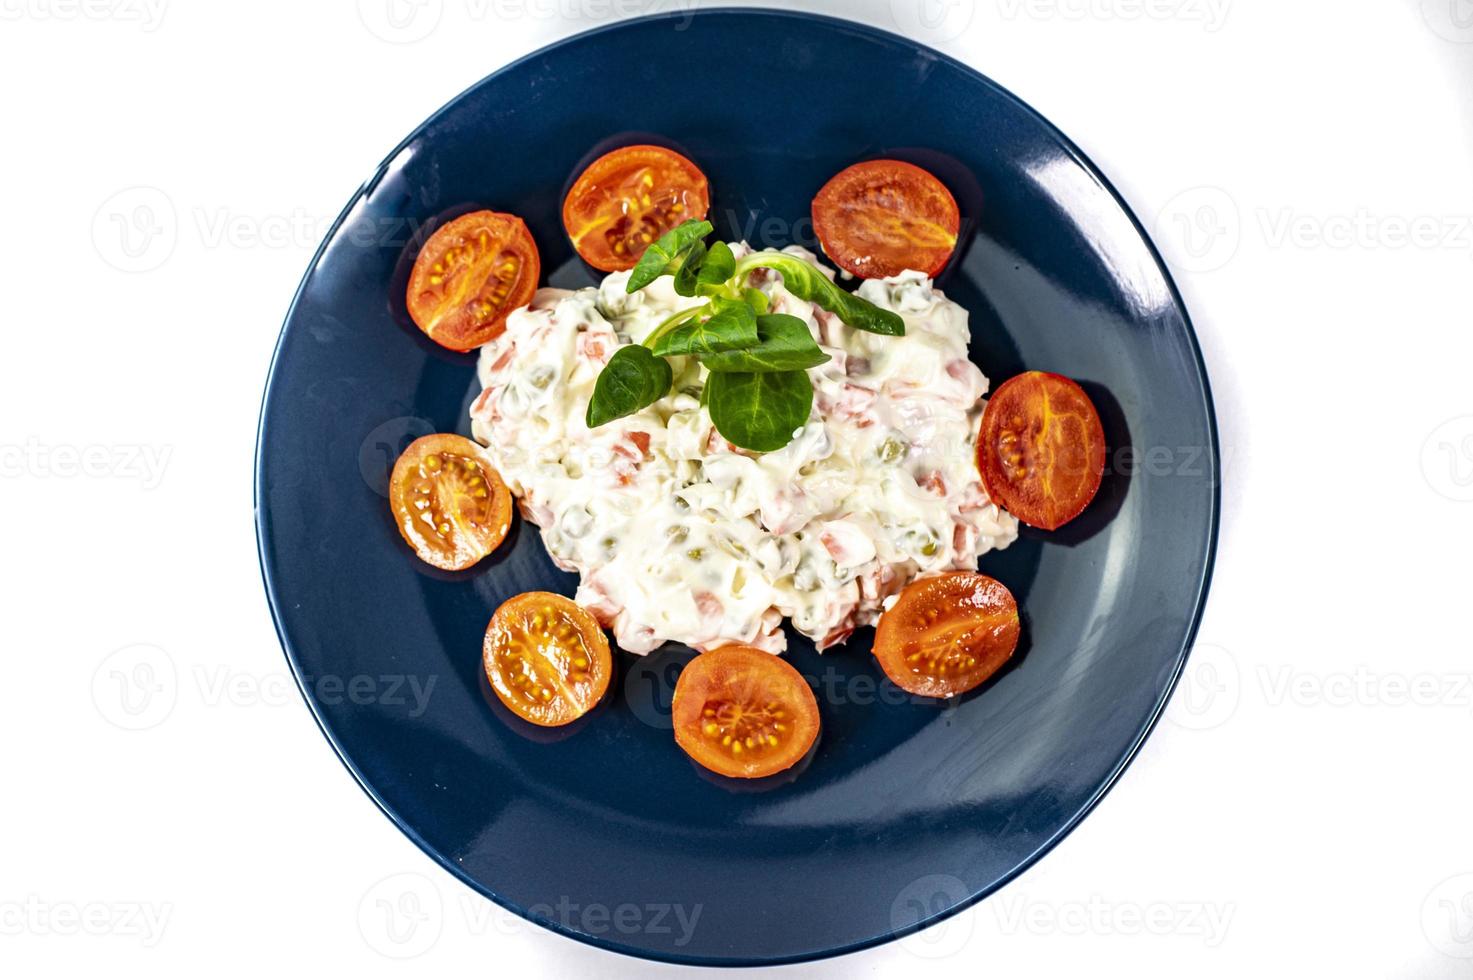 Russian salad on blue plate photo